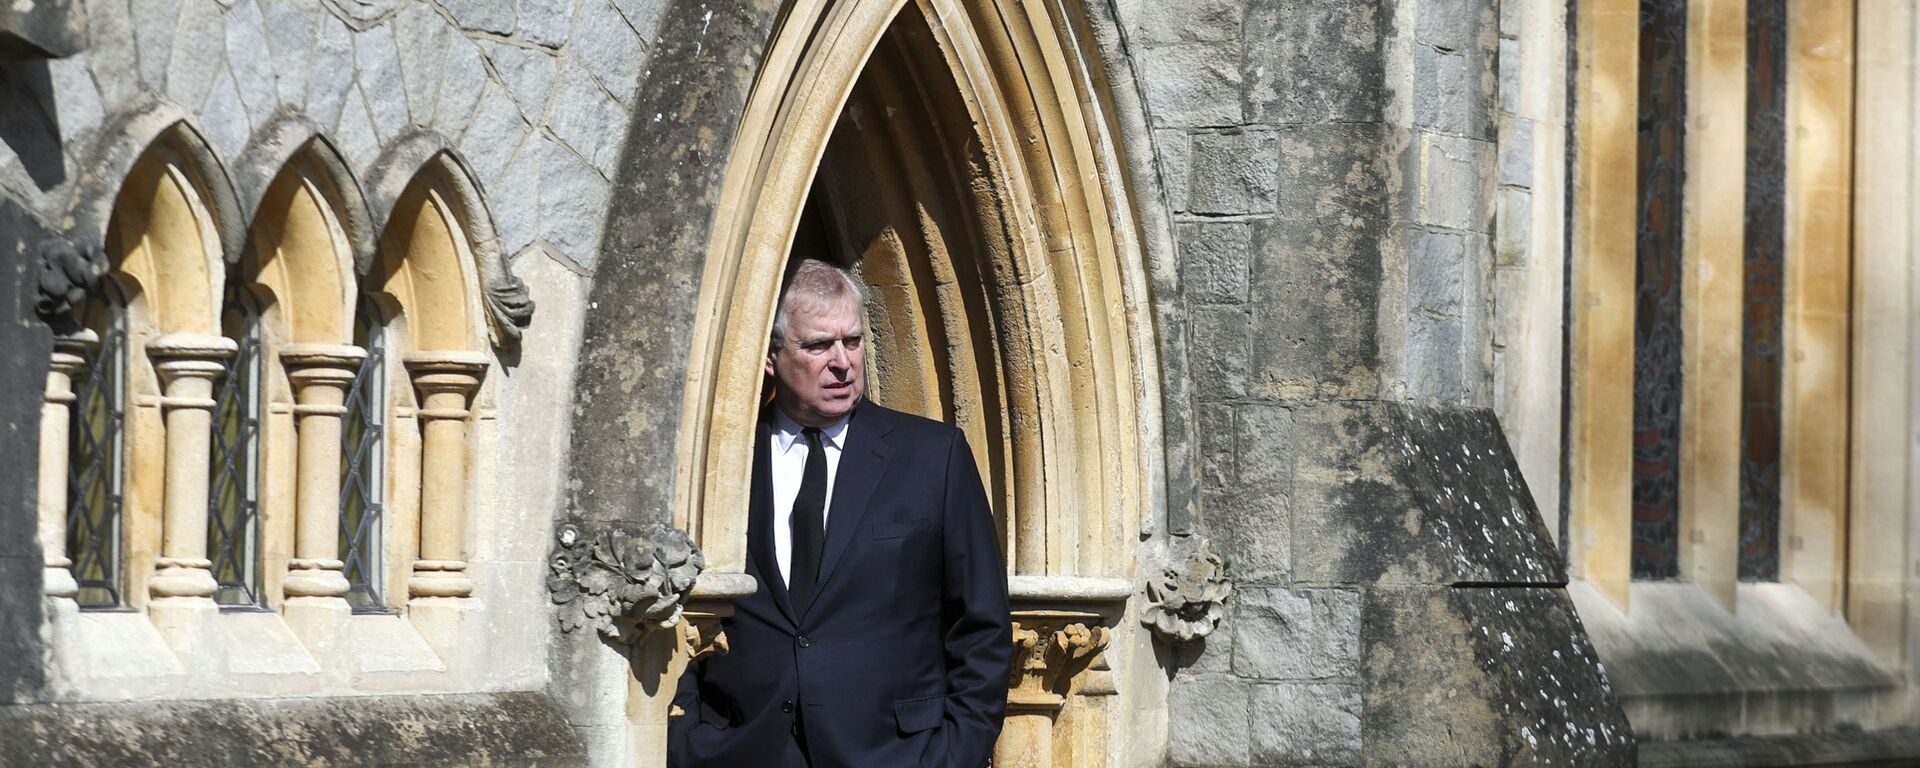 Britain's Prince Andrew attends the Sunday service at the Royal Chapel of All Saints at Royal Lodge, Windsor, following the death announcement of his father, Prince Philip, in England, Sunday, April 11, 2021. - Sputnik International, 1920, 11.09.2021